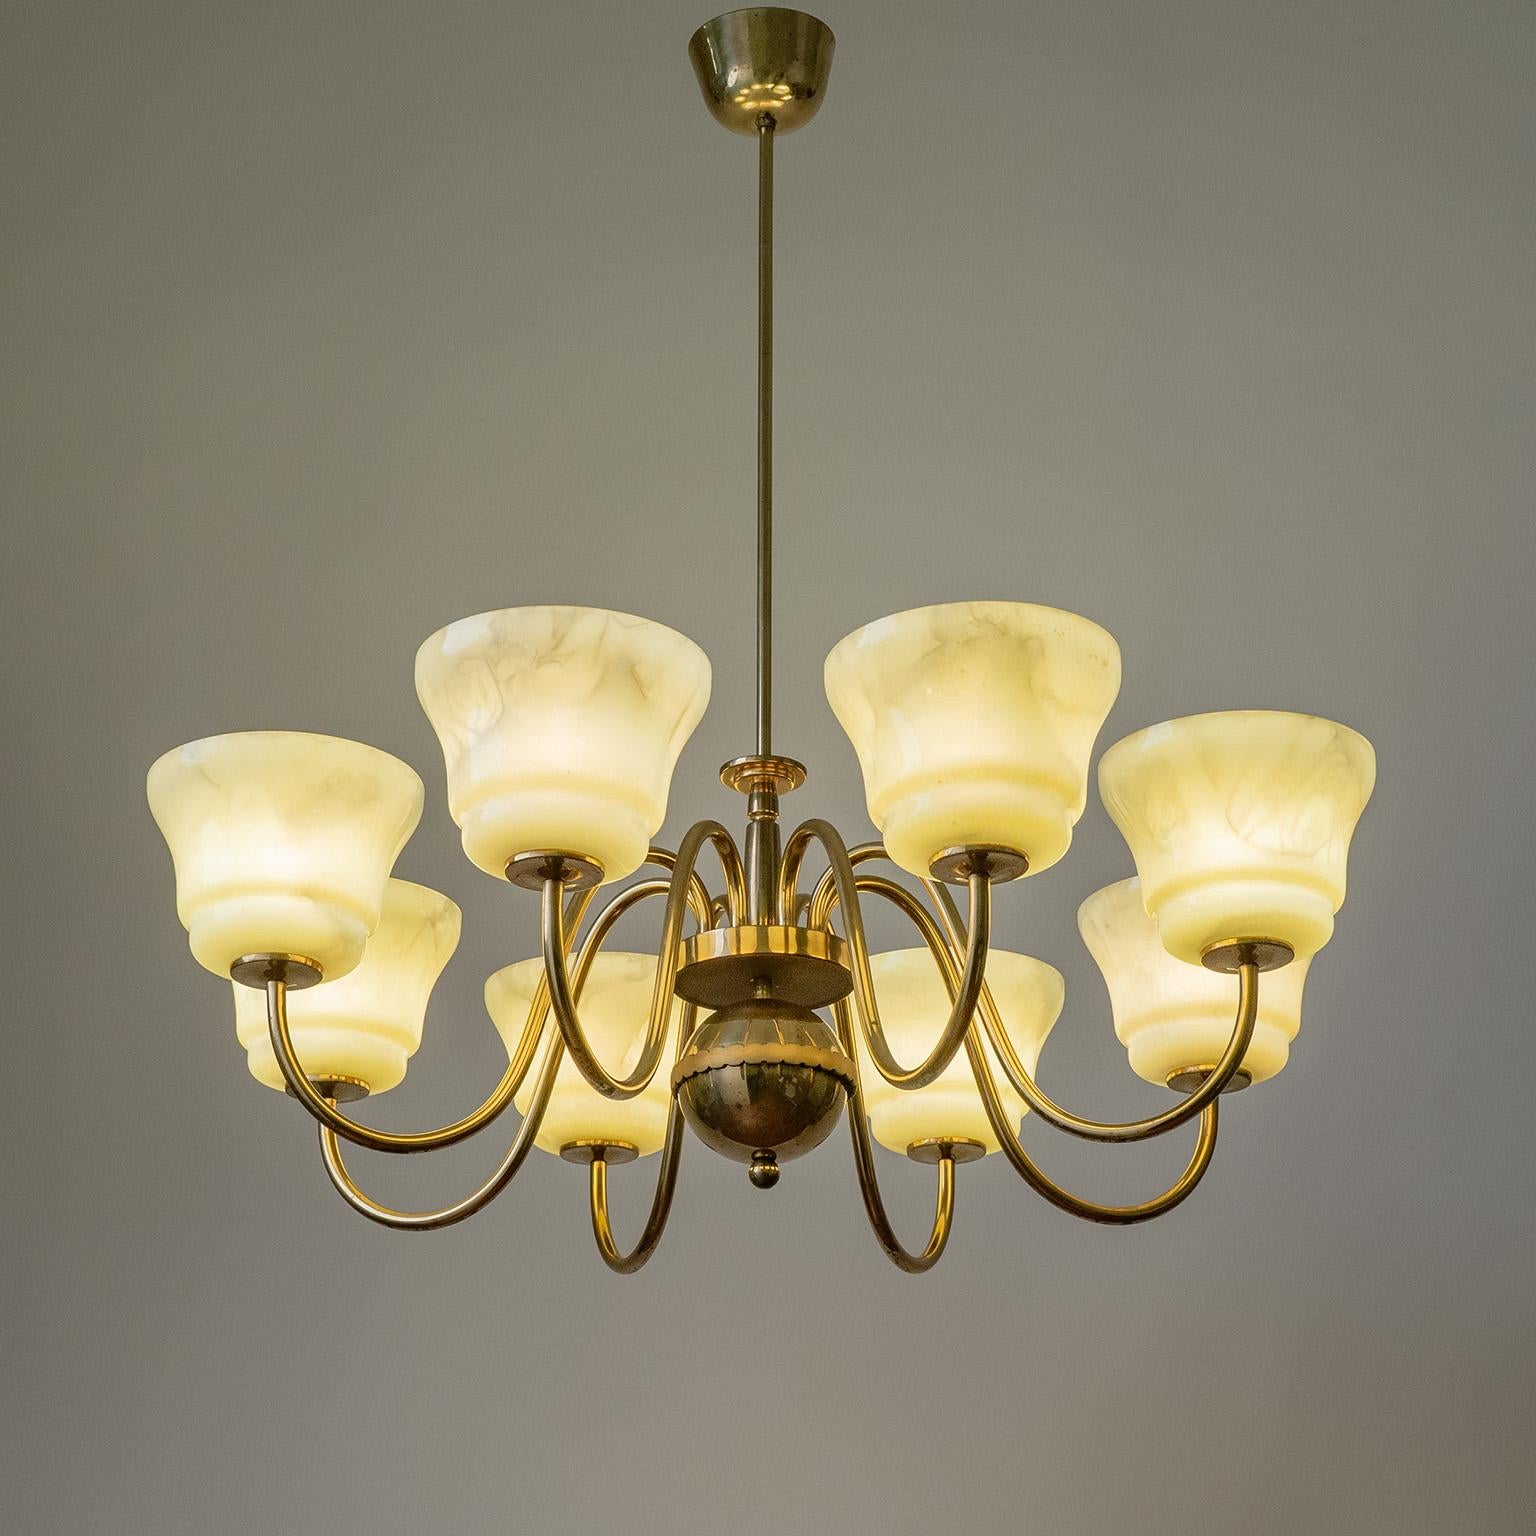 Large Brass Chandelier with Enameled Glass Shades, 1940s For Sale 3